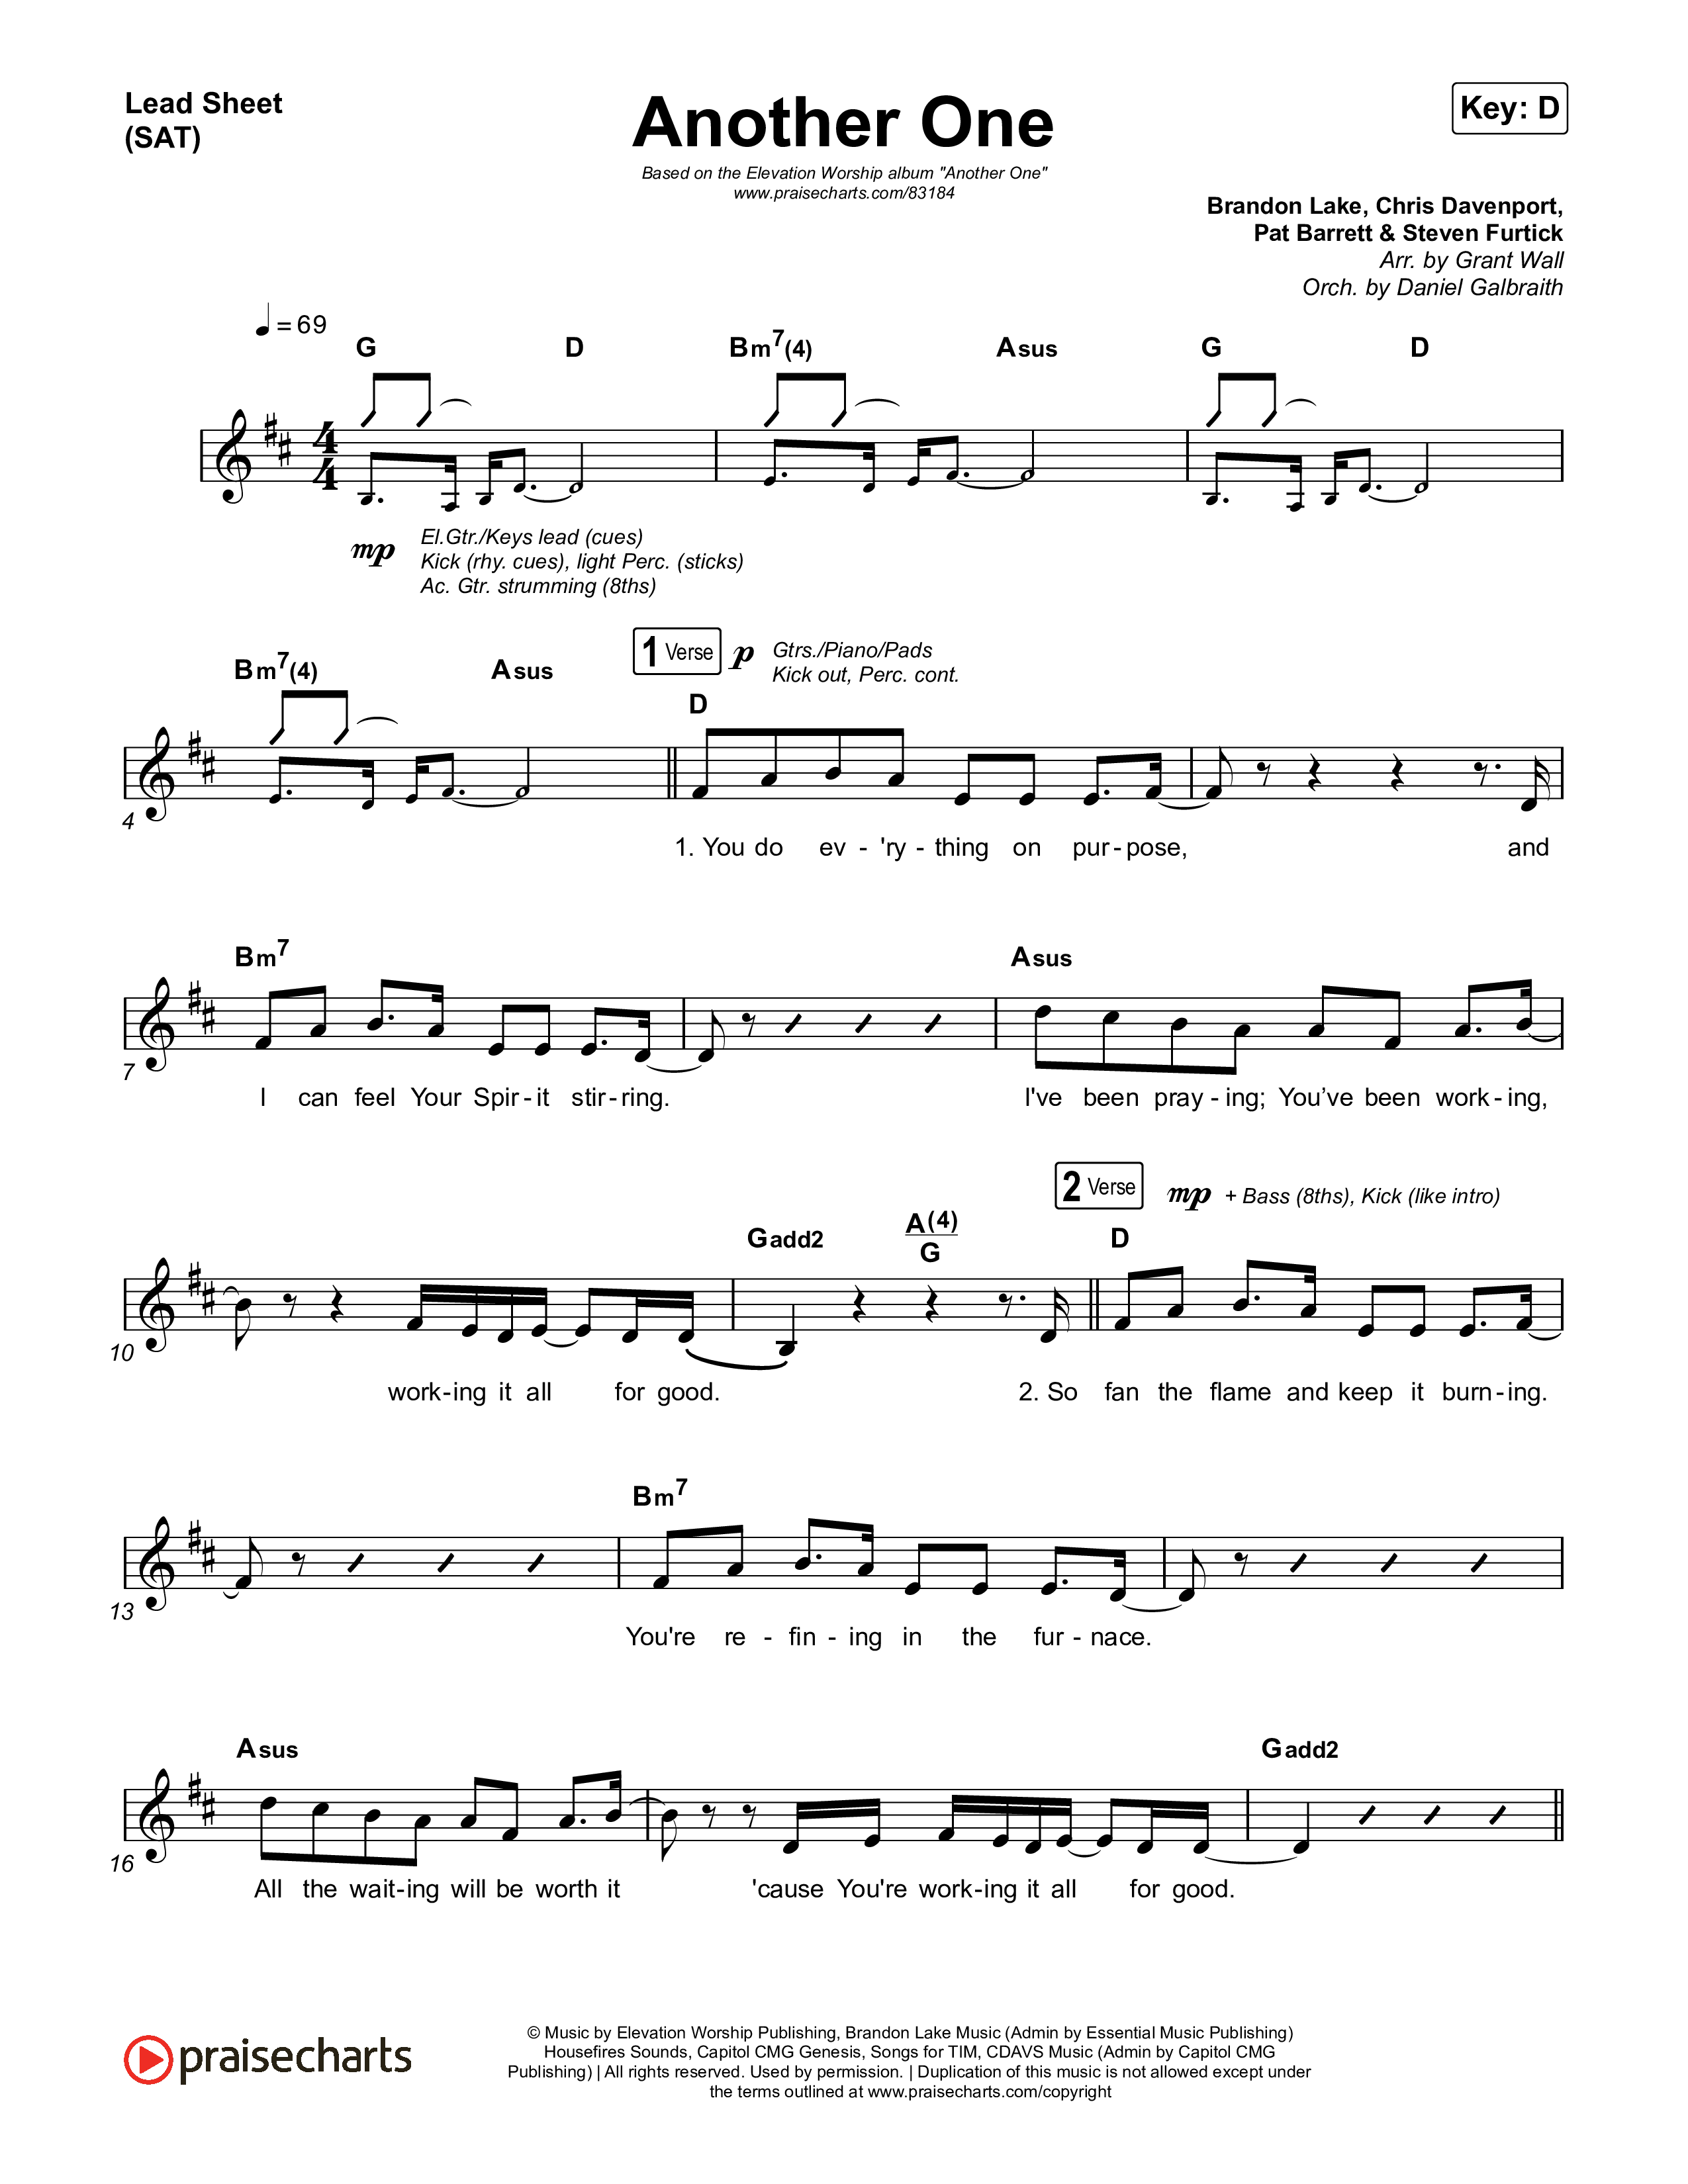 Another One Lead Sheet (SAT) (Elevation Worship)